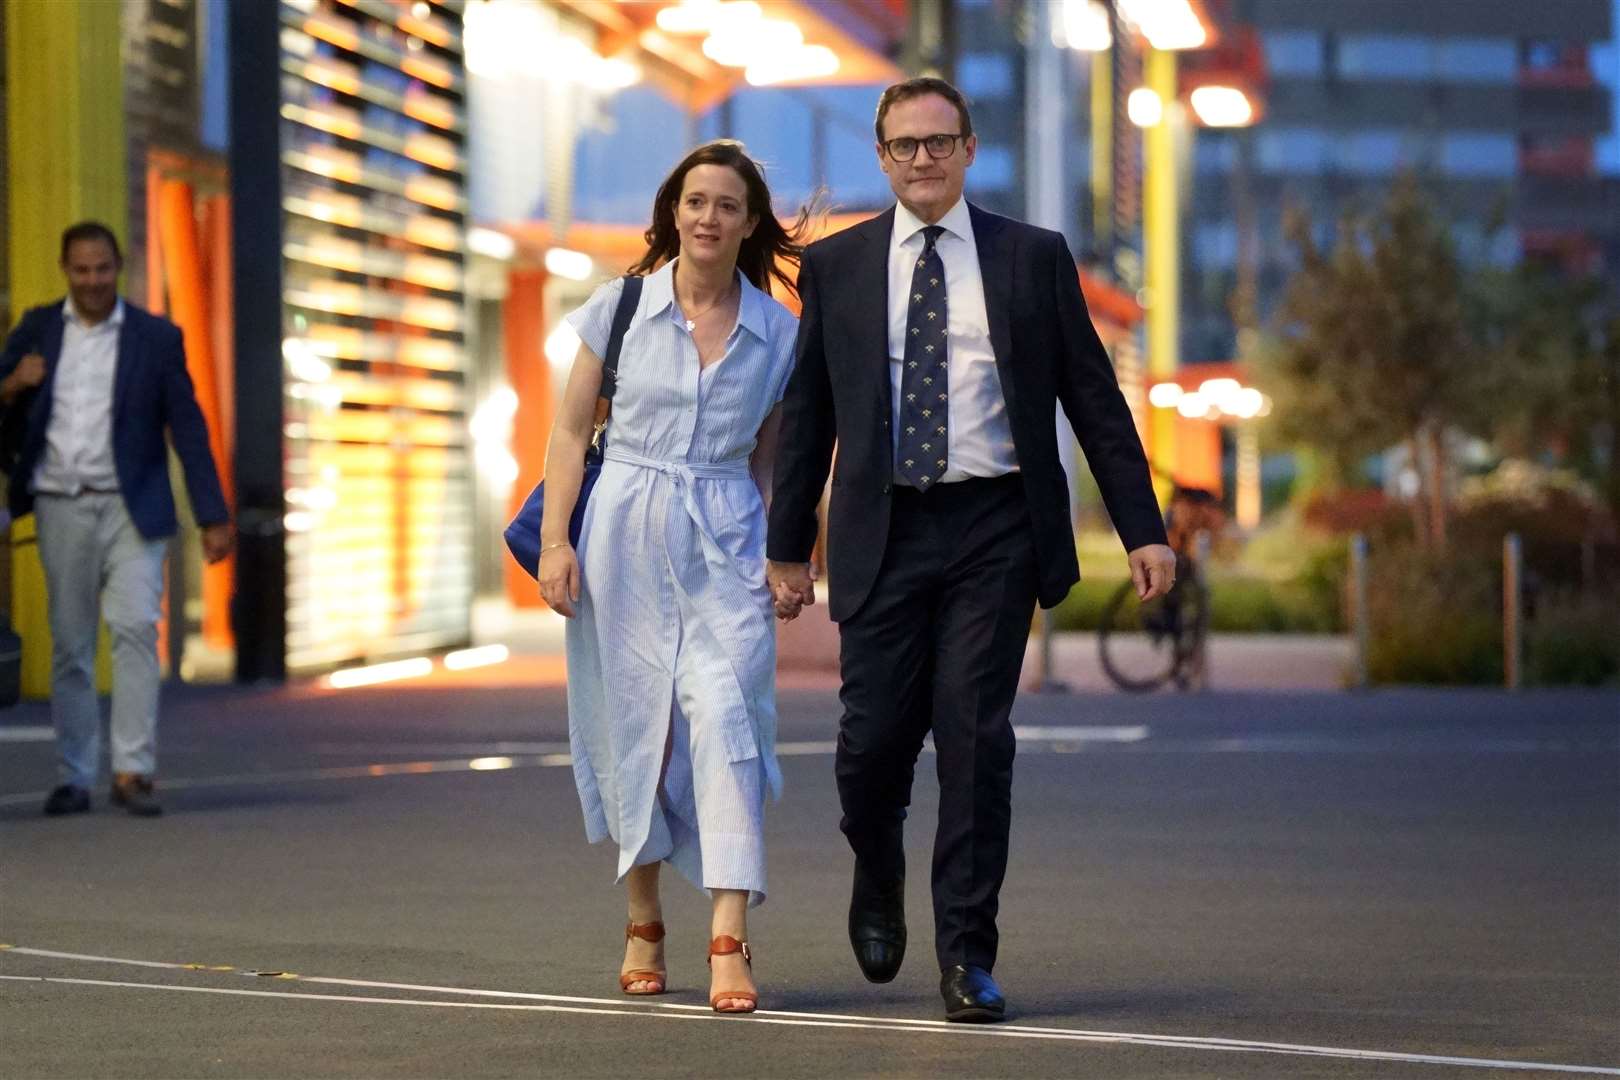 Tom Tugendhat leaves with his wife, Anissia, following the first leadership debate (Victoria Jones/PA)